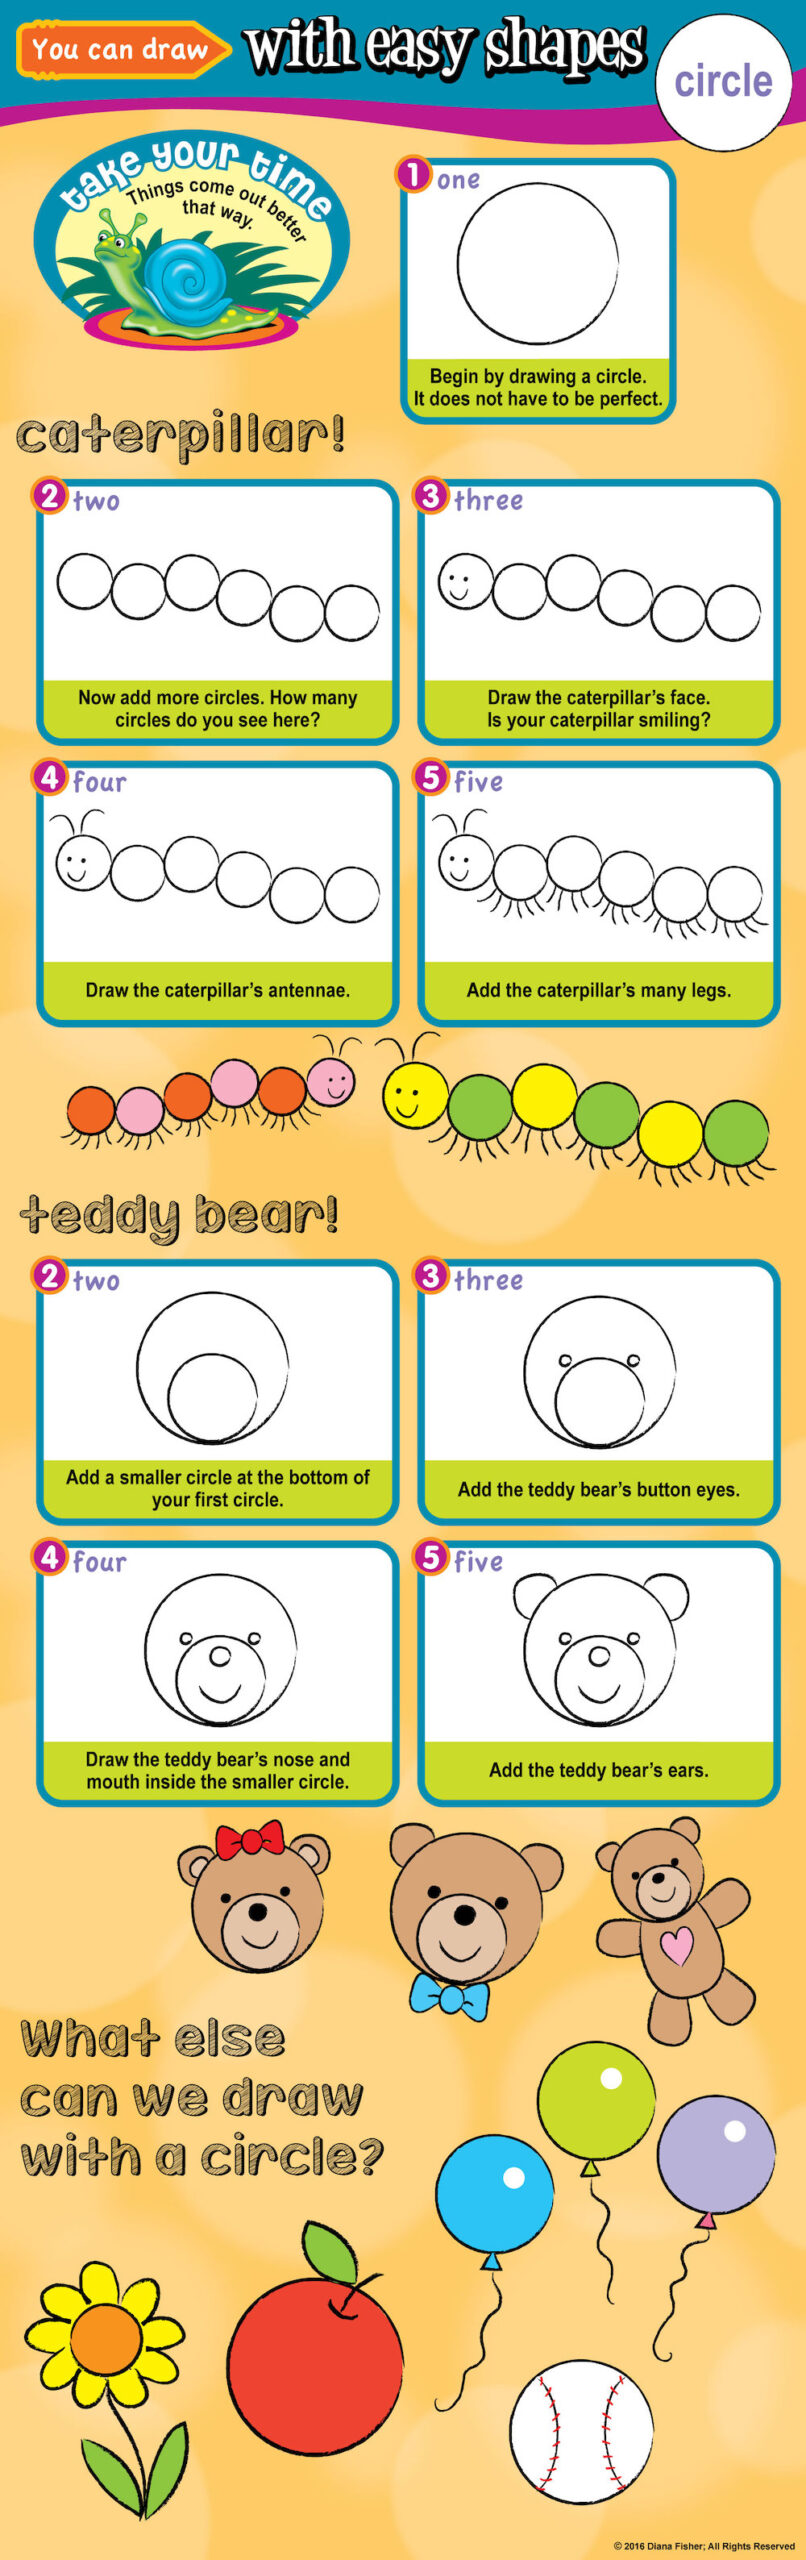 easy how to draw caterpillar and teddy bear for children